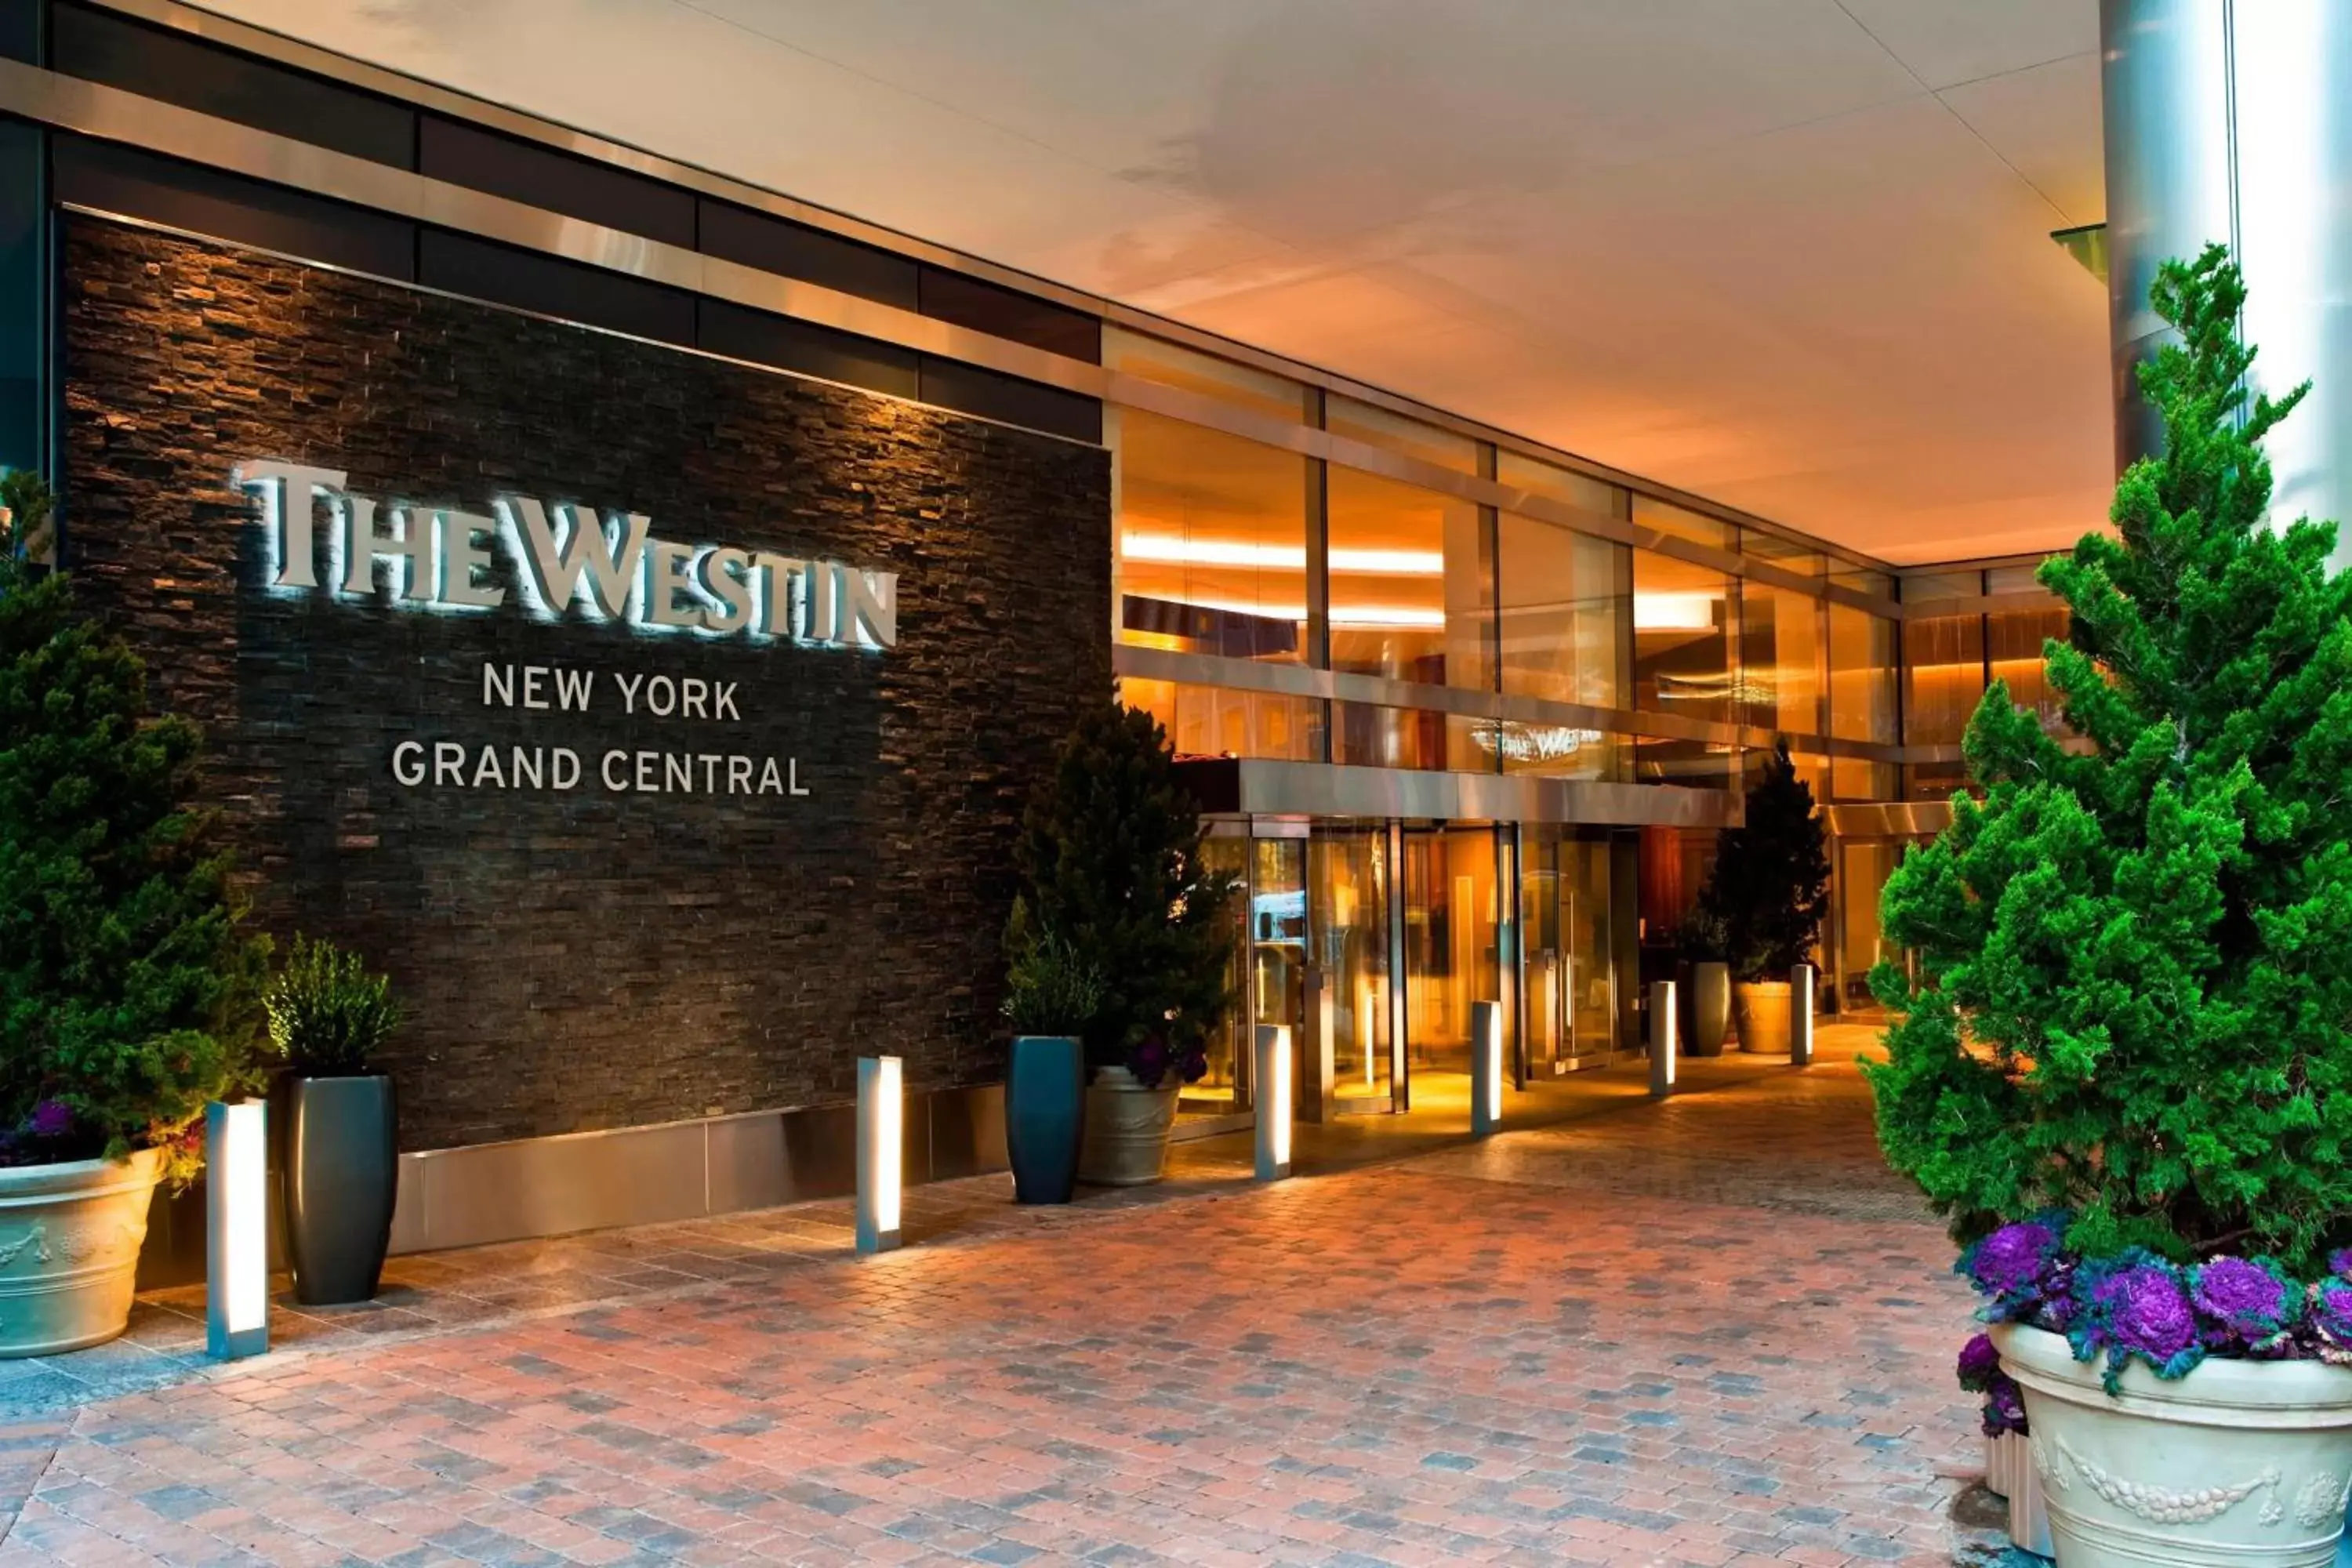 Property building in The Westin New York Grand Central